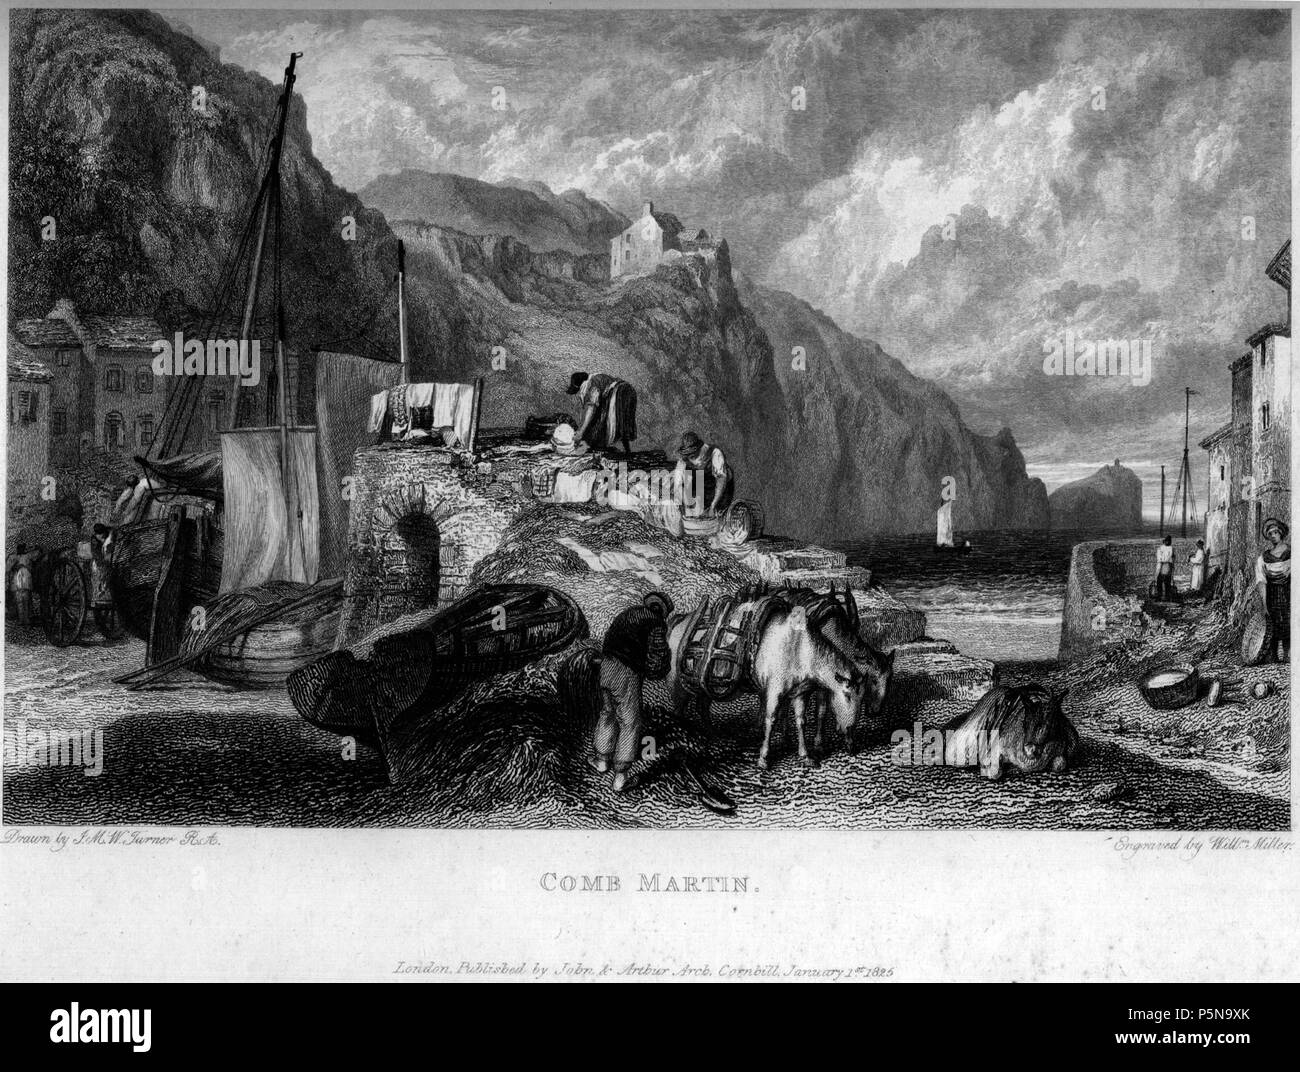 N/A. Comb Martin. engraving by William Miller after J M W Turner, published in Picturesque Views on the Southern Coast of England from drawings made principally by J.M.W. Turner, R.A. and engraved by W.B. Cooke, George Cooke and other eminent engravers, John and Arthur Arch, London 1826 . 1826.   William Miller  (1796–1882)     Alternative names William Frederick I Miller; William Frederick, I Miller  Description Scottish engraver  Date of birth/death 28 May 1796 20 January 1882  Location of birth/death Edinburgh Sheffield  Authority control  : Q2580014 VIAF:75215312 ISNI:0000 0000 6708 7623 U Stock Photo